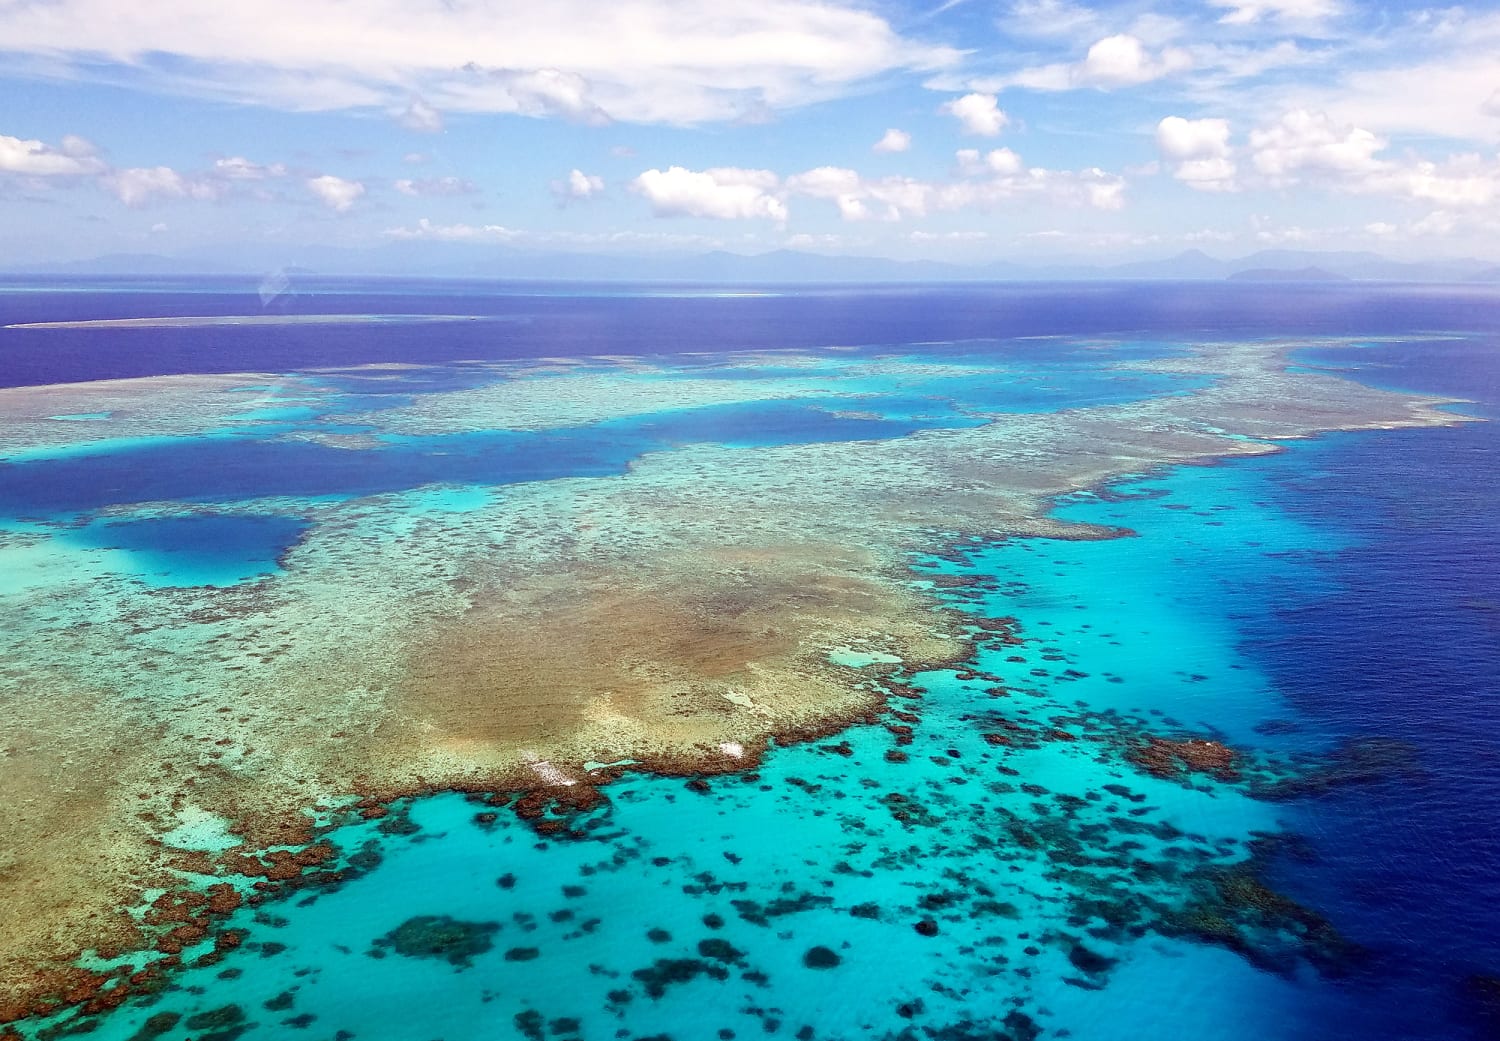 The Great Reef is under assault. It's the time